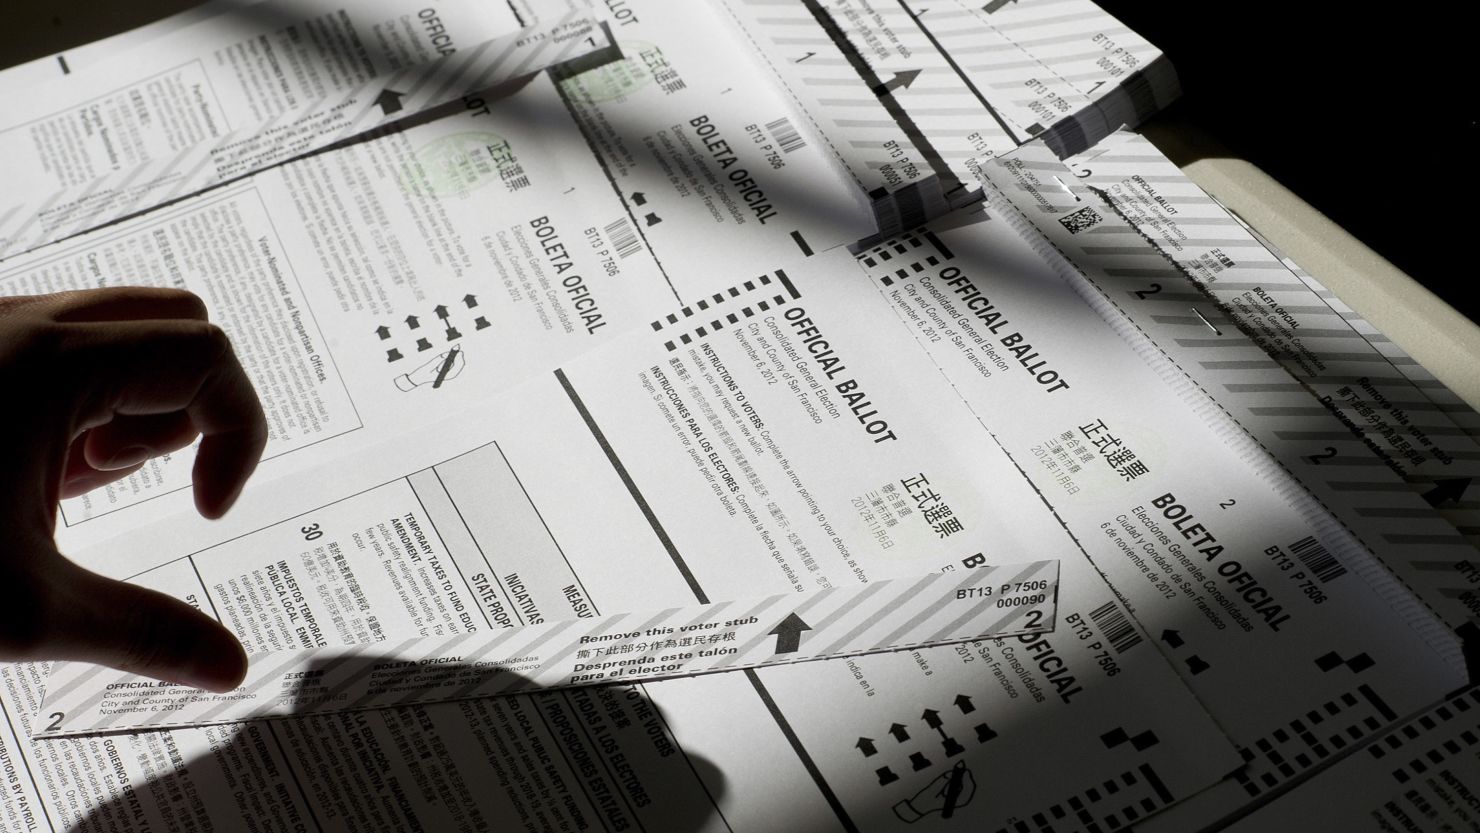 Twenty-three polling places in Hawaii ran out of ballots on Tuesday.